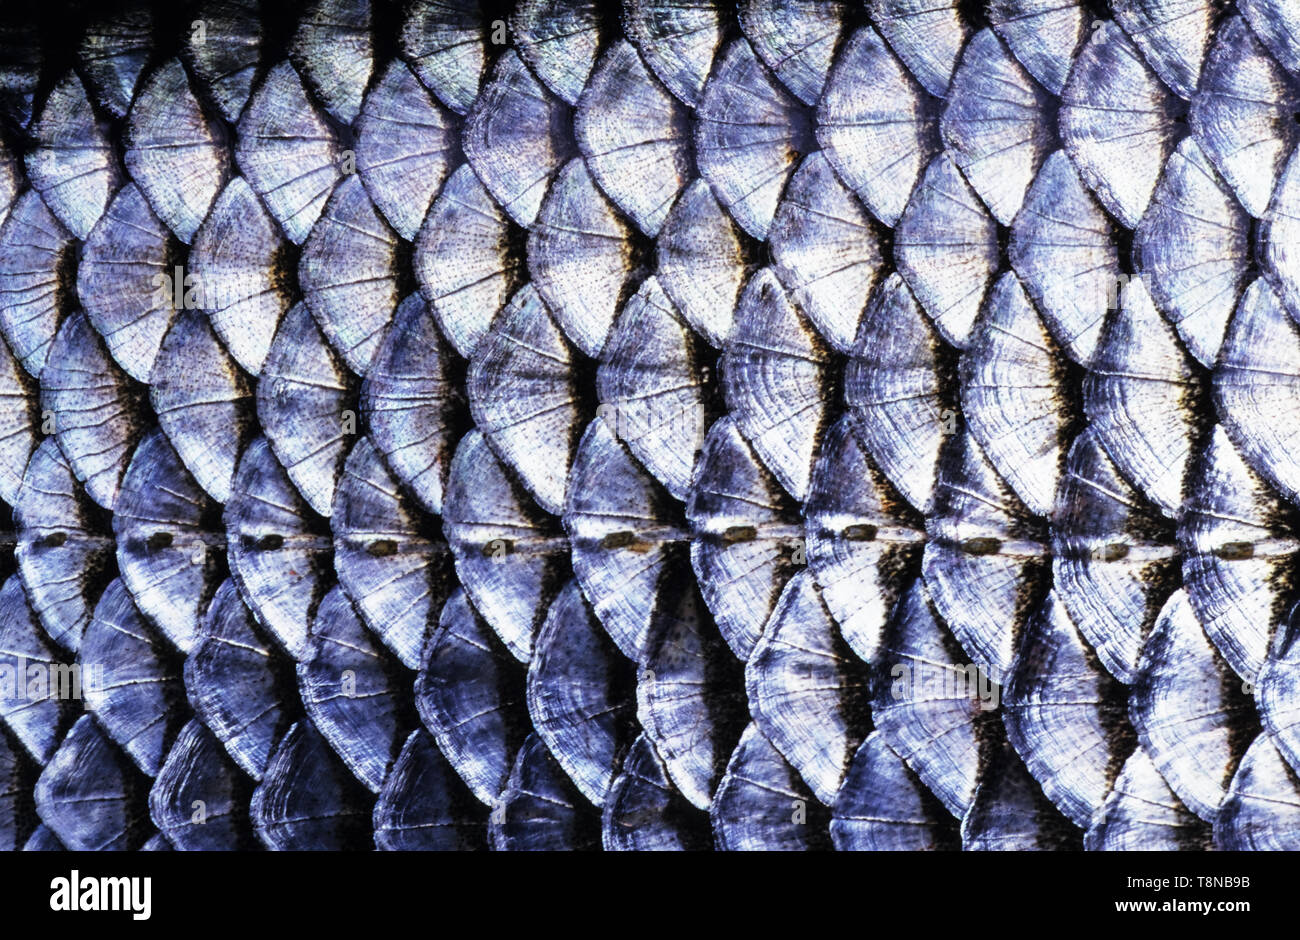 Fish (Roach, Rutilus rutilus) scale close-up. The row of lateral line scales is visible in the middle of the image. Stock Photo